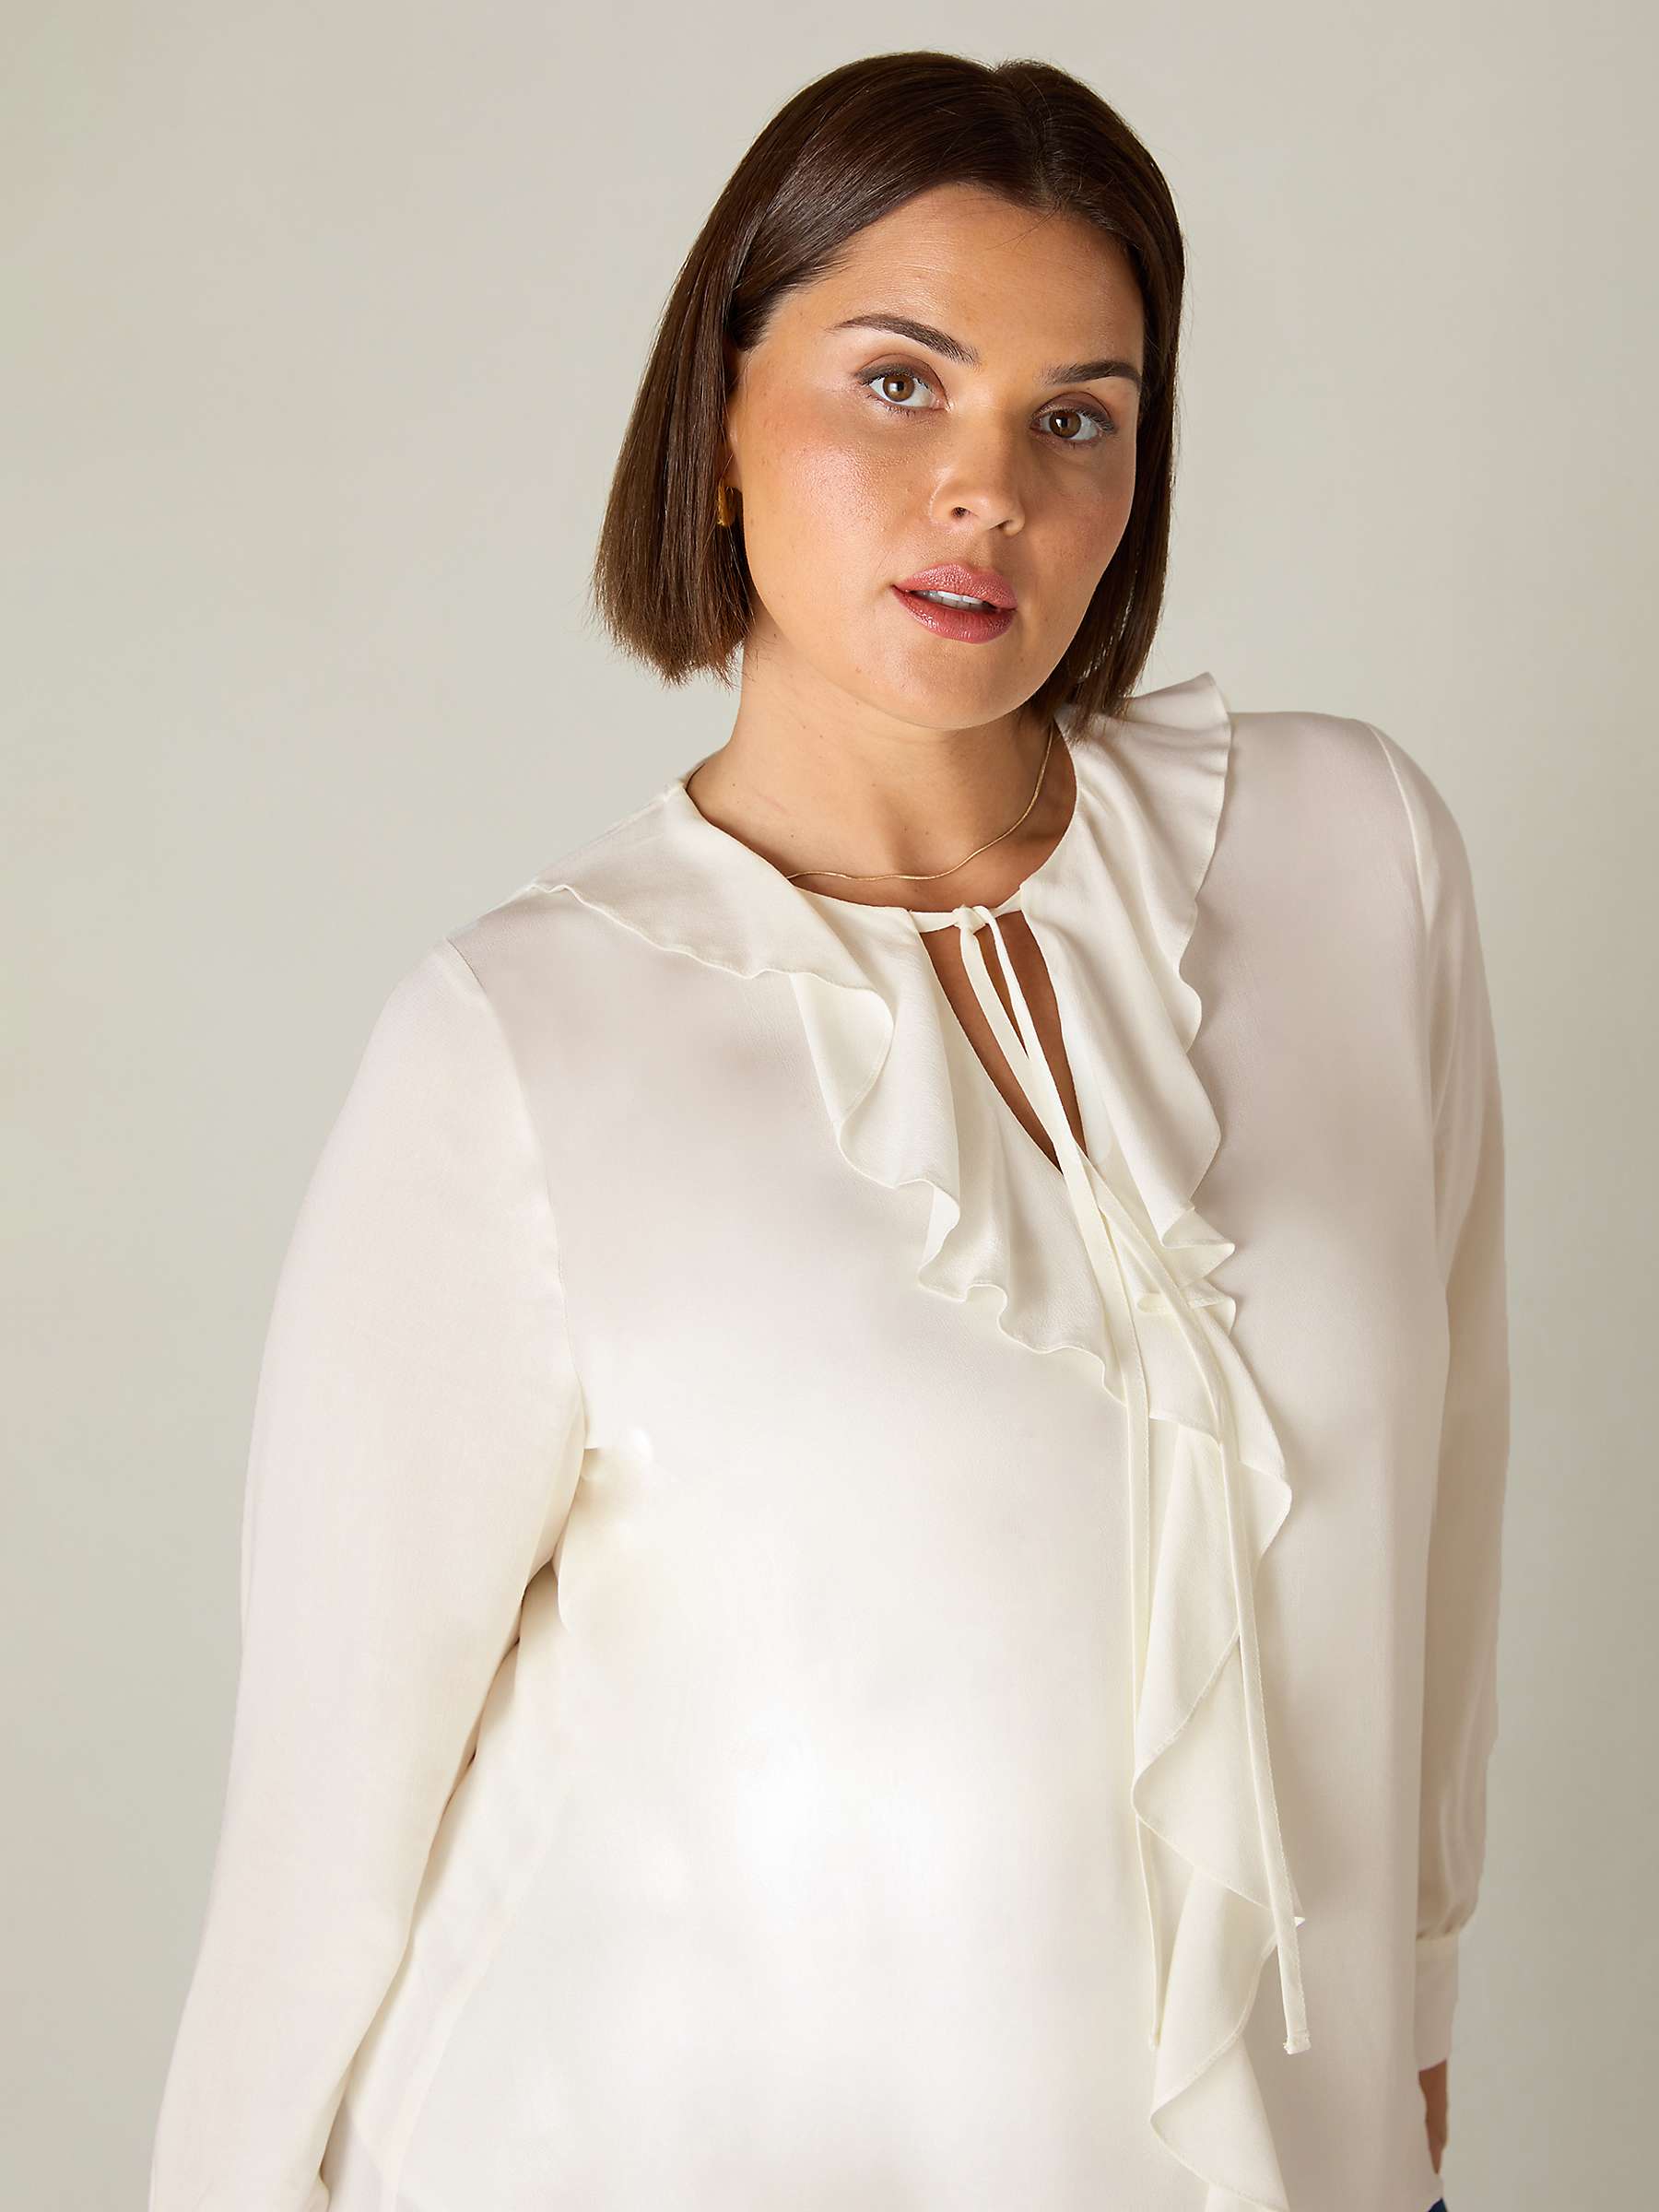 Buy Live Unlimited Curve Ruffle Front Top Online at johnlewis.com